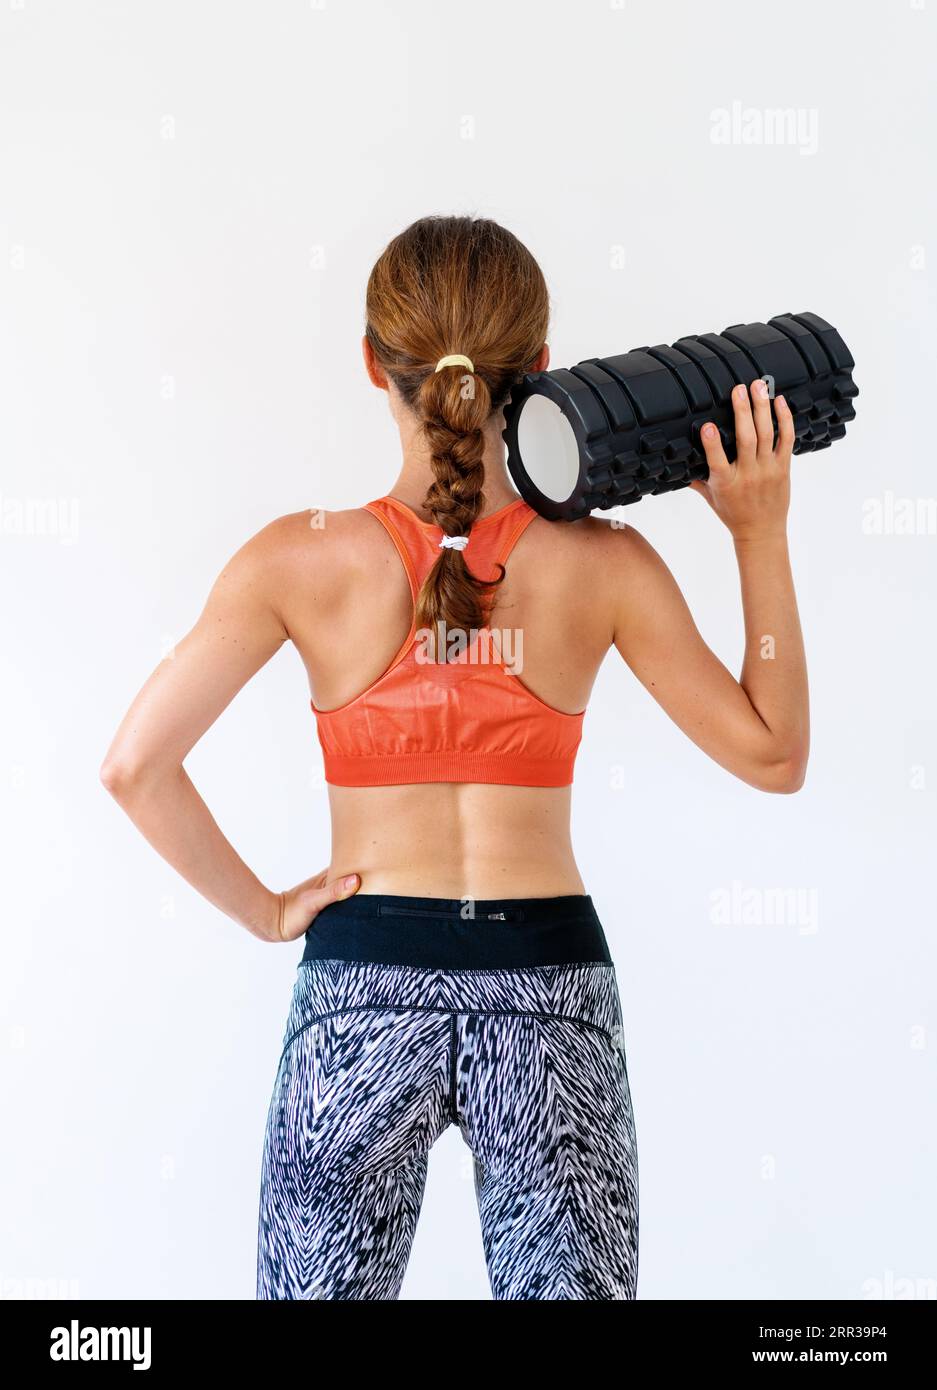 Rear view photo of female fitness coach standing in front of white background in studio with foam roller in hand. Stock Photo